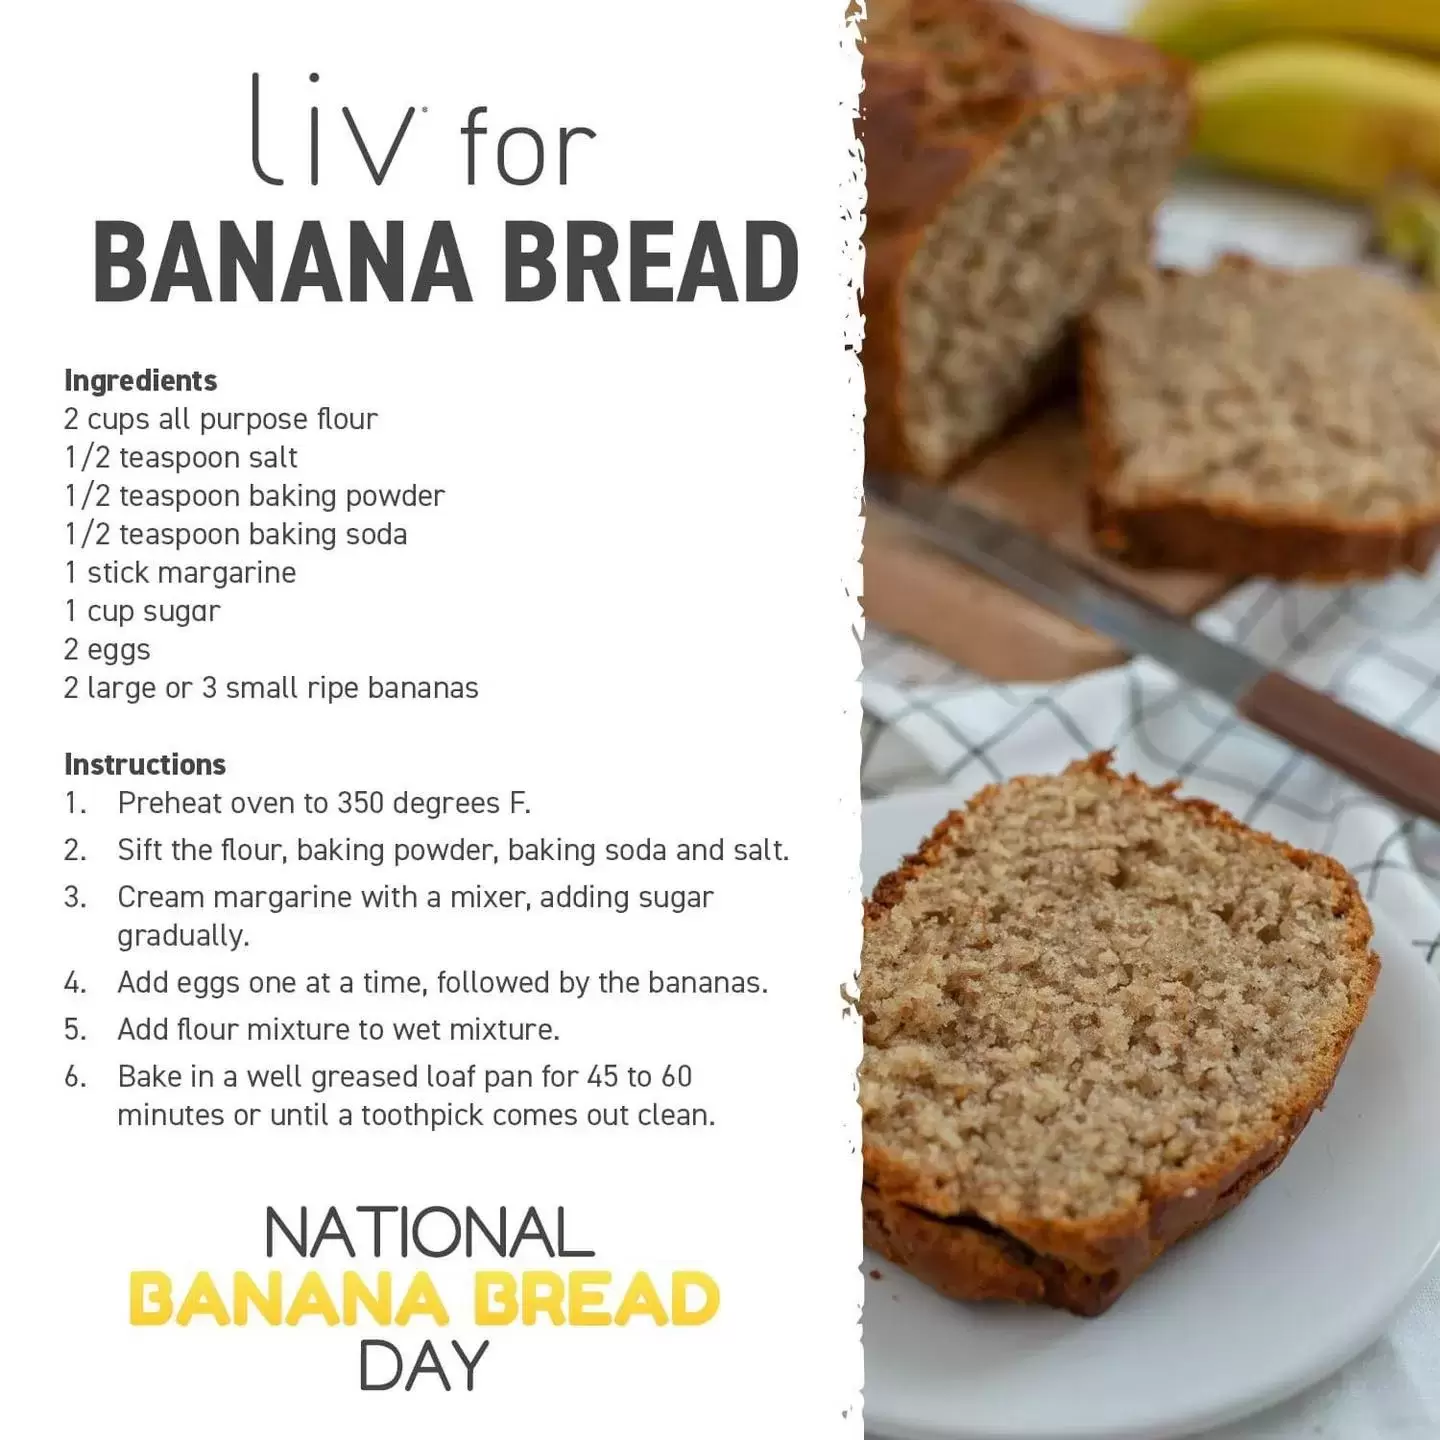 Celebrate National Banana Bread day by trying this awesome recipe! Yum! 🍌